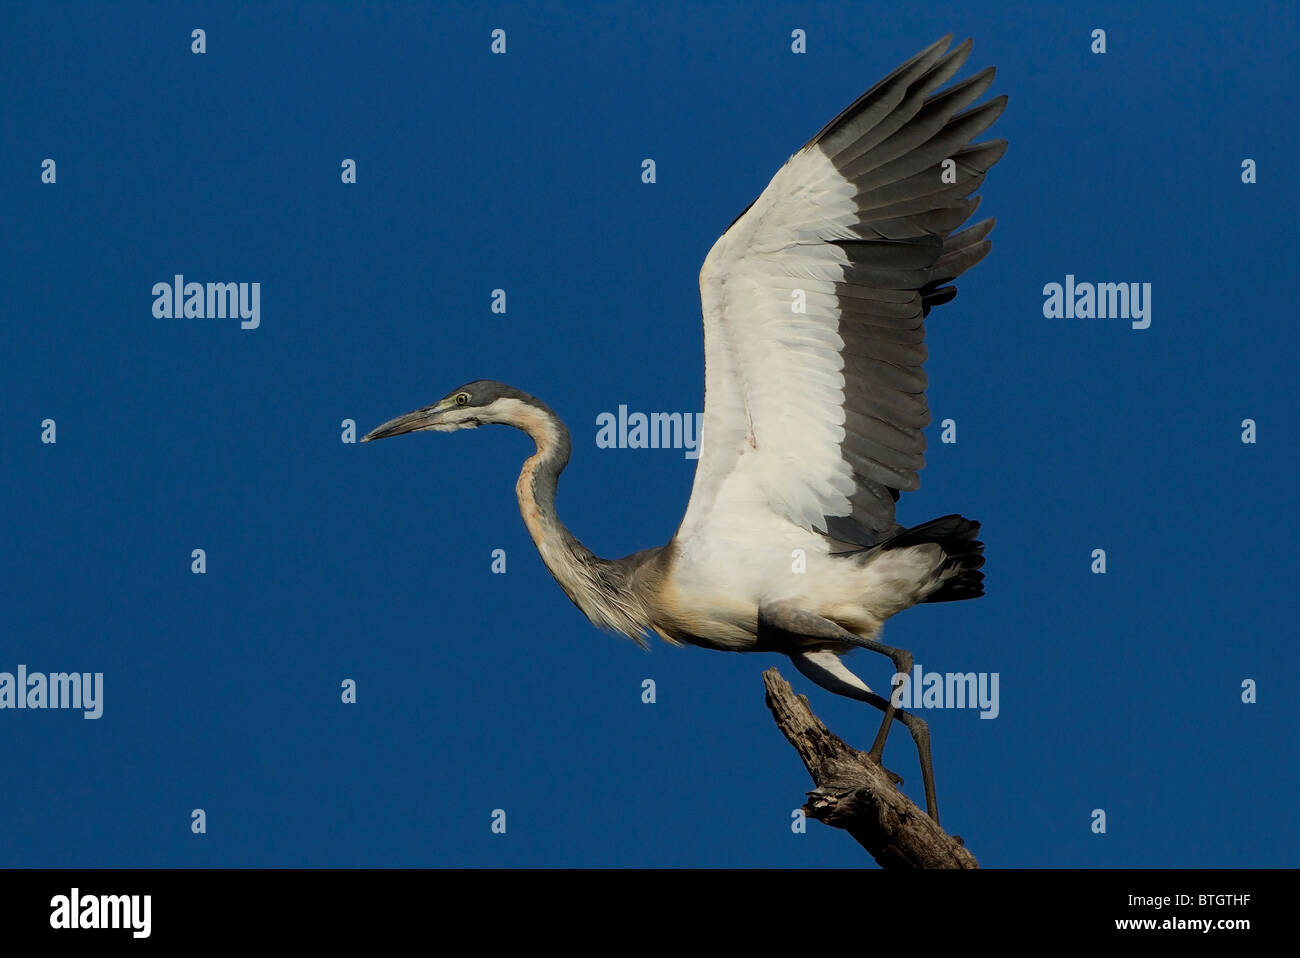 Black-headed Heron taking off from its perch, Kruger National Park, South Africa. Stock Photo